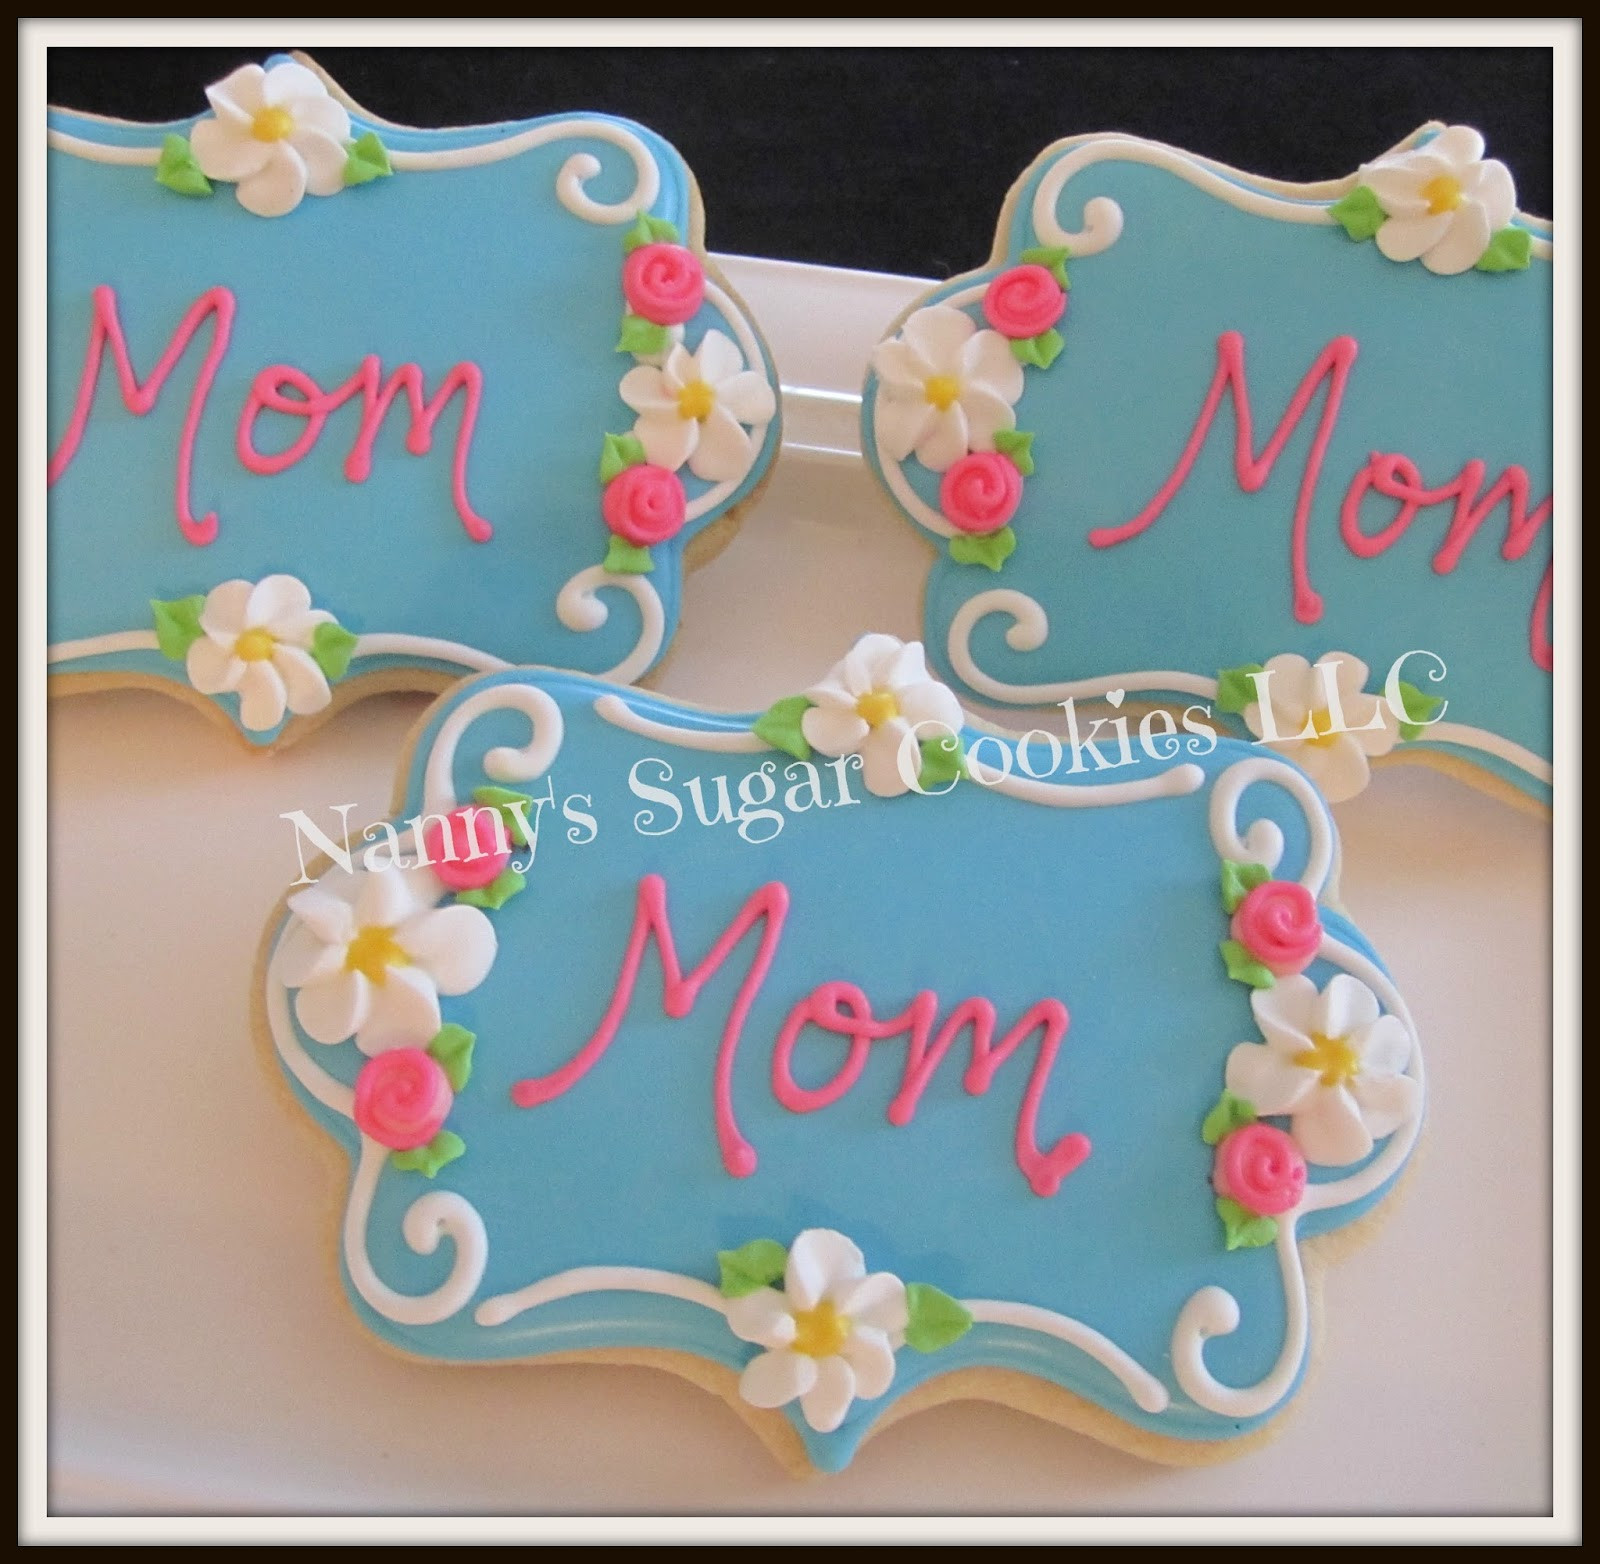 Mother'S Day Sugar Cookies
 Nanny s Sugar Cookies LLC Happy Mother s Day 2016